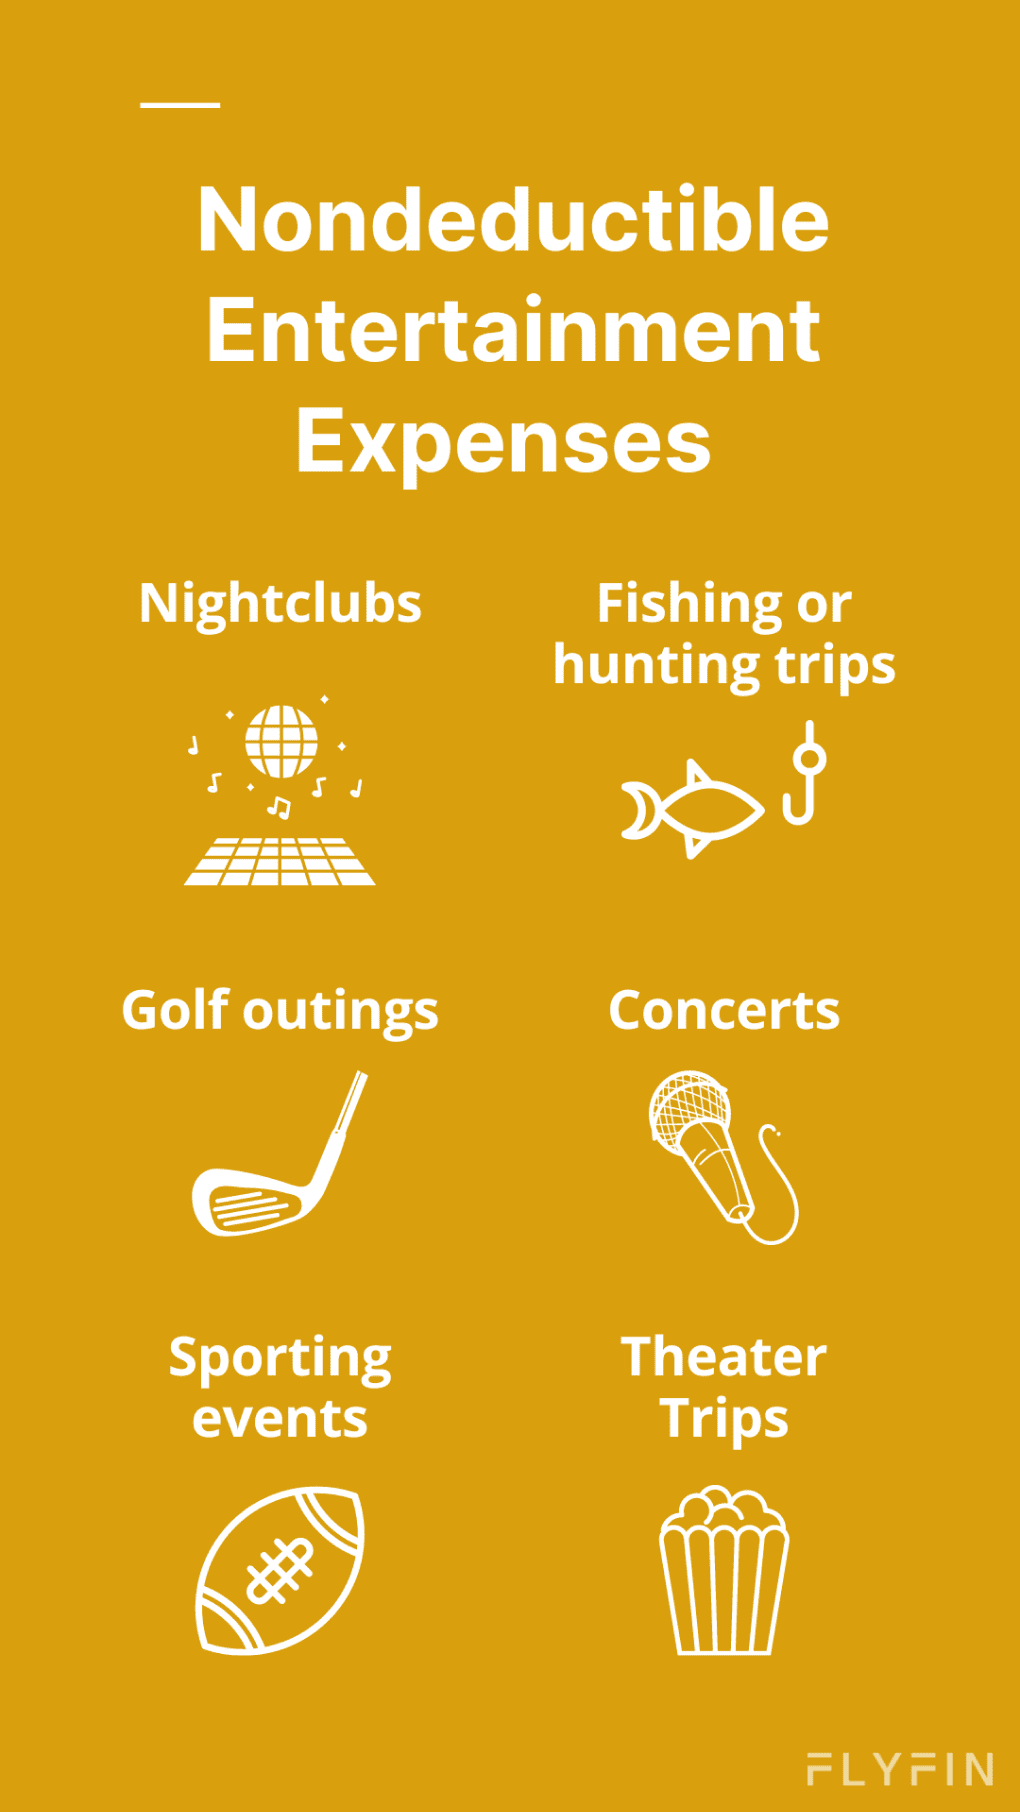 Can I write off concert tickets and other entertainment expenses?